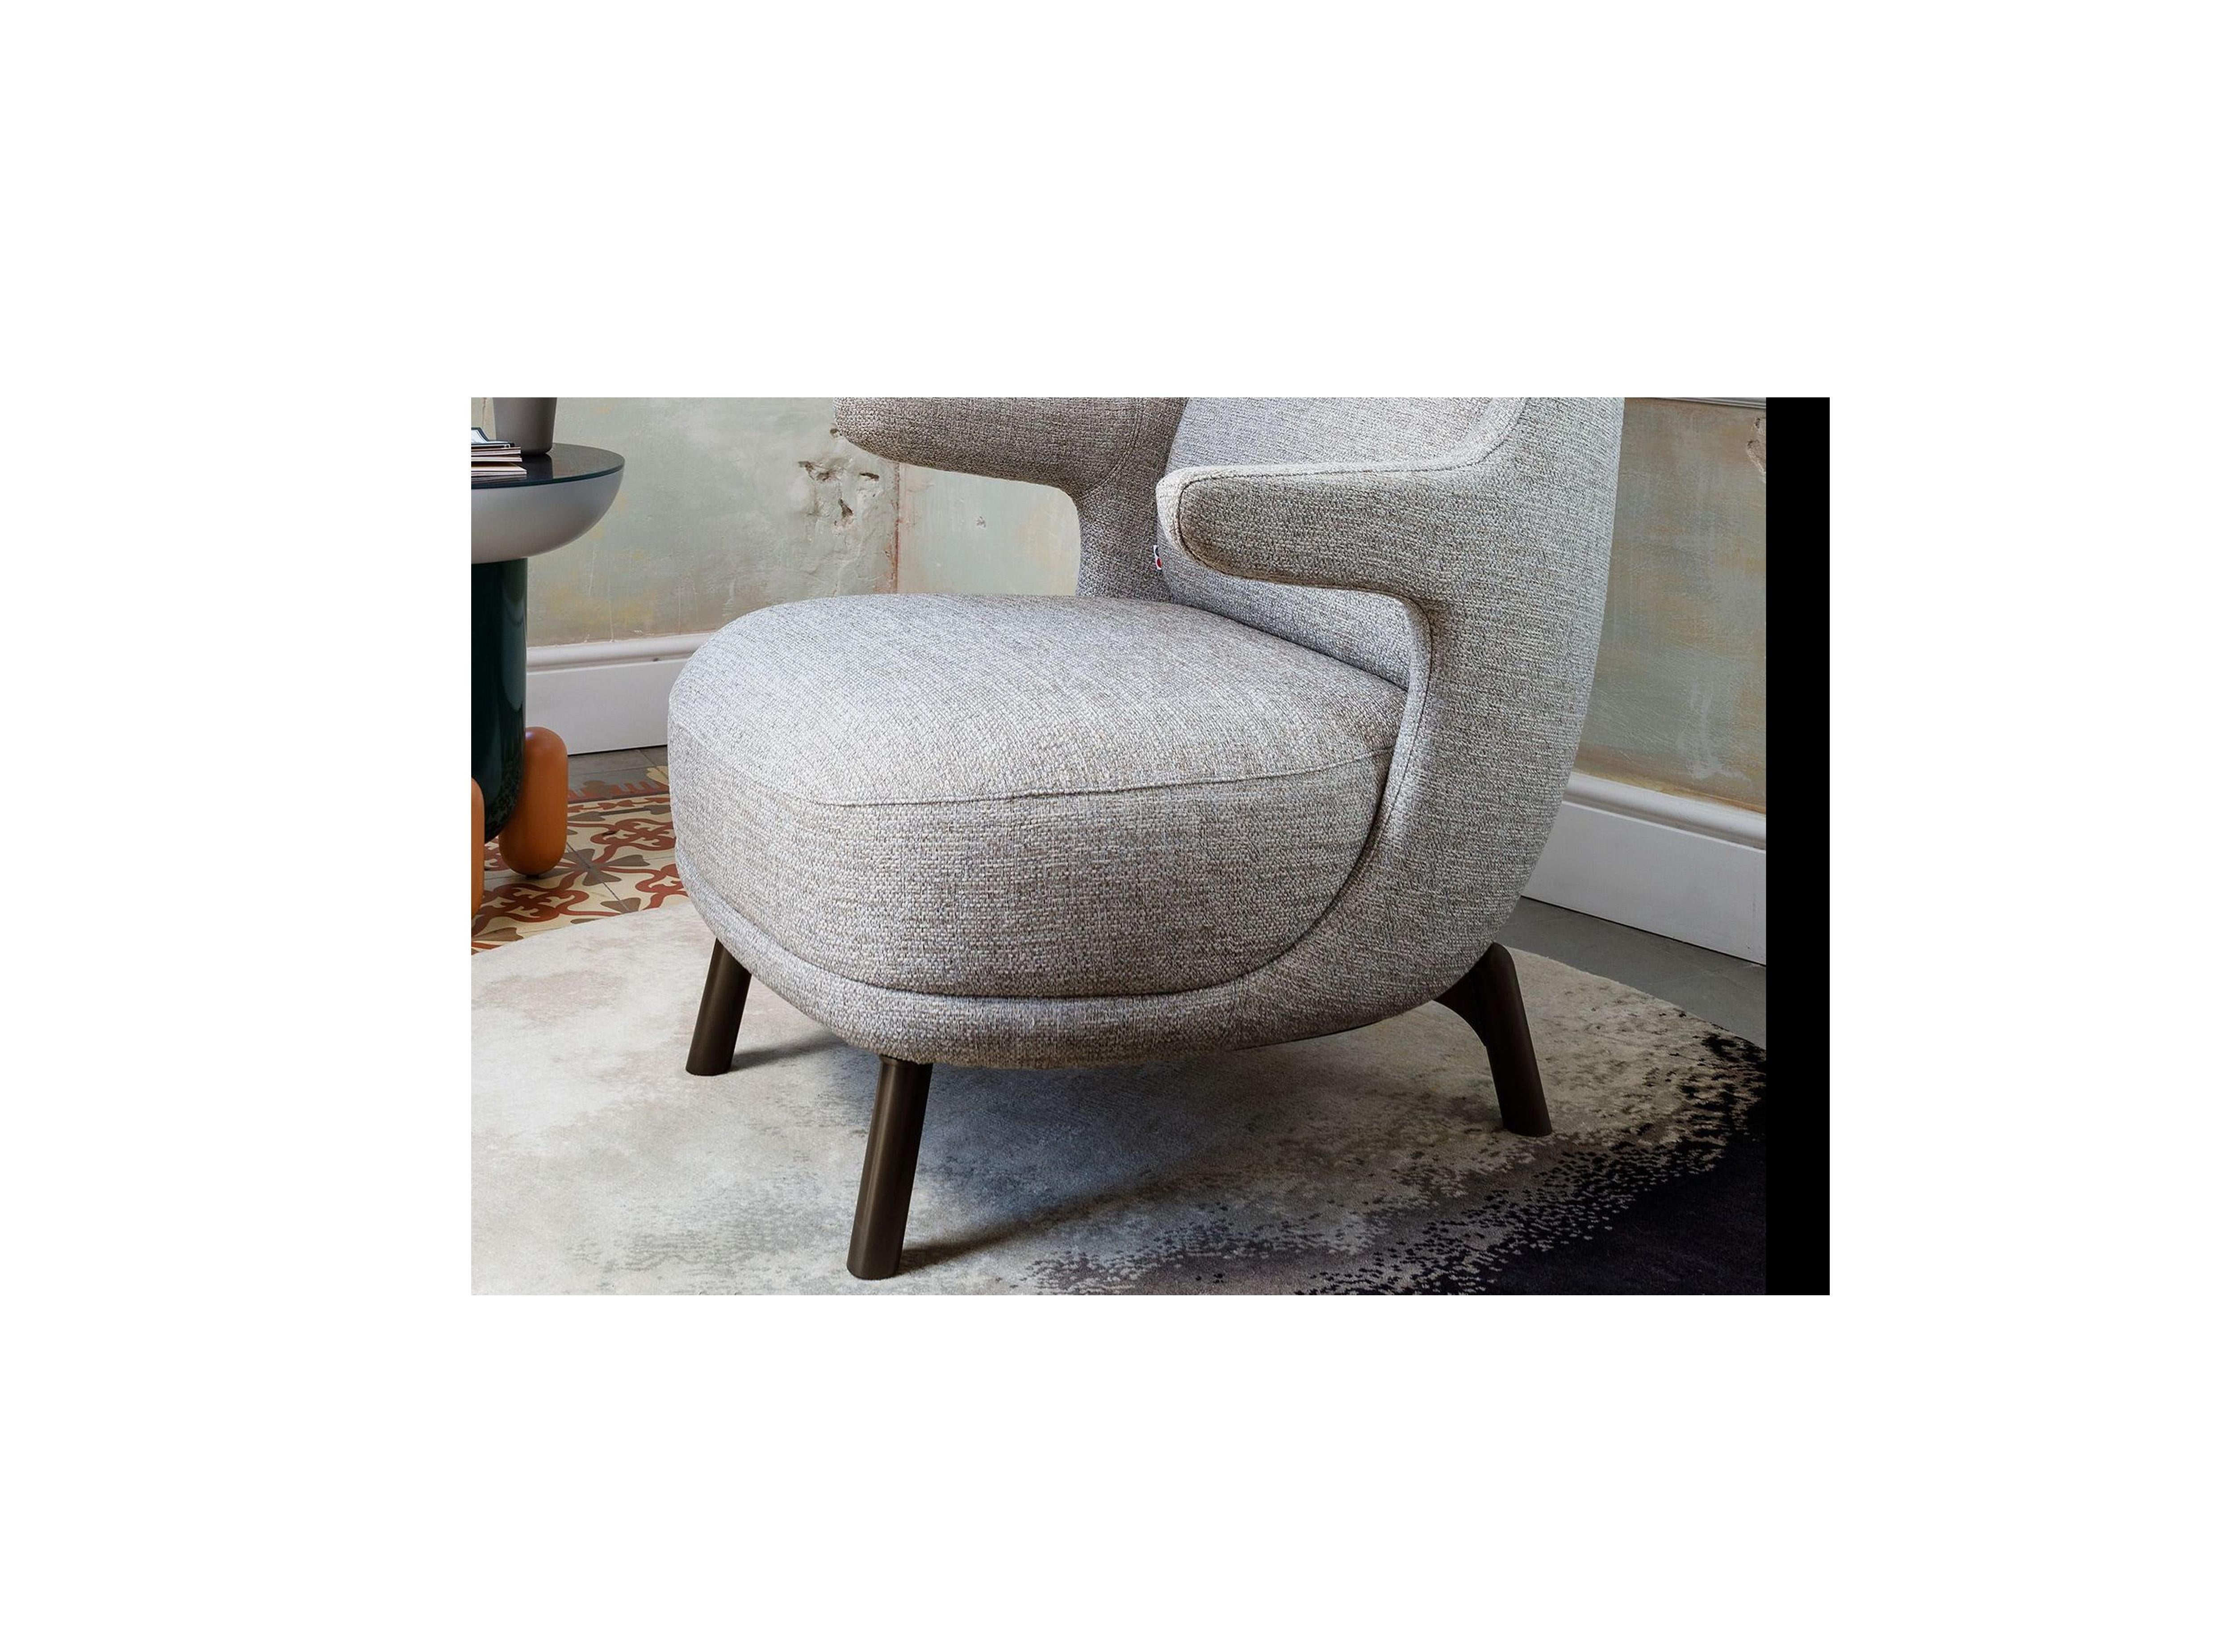 Modern Jaime Hayon, Contemporary, Monocolor in Gray Fabric Upholstery Dino Armchair For Sale